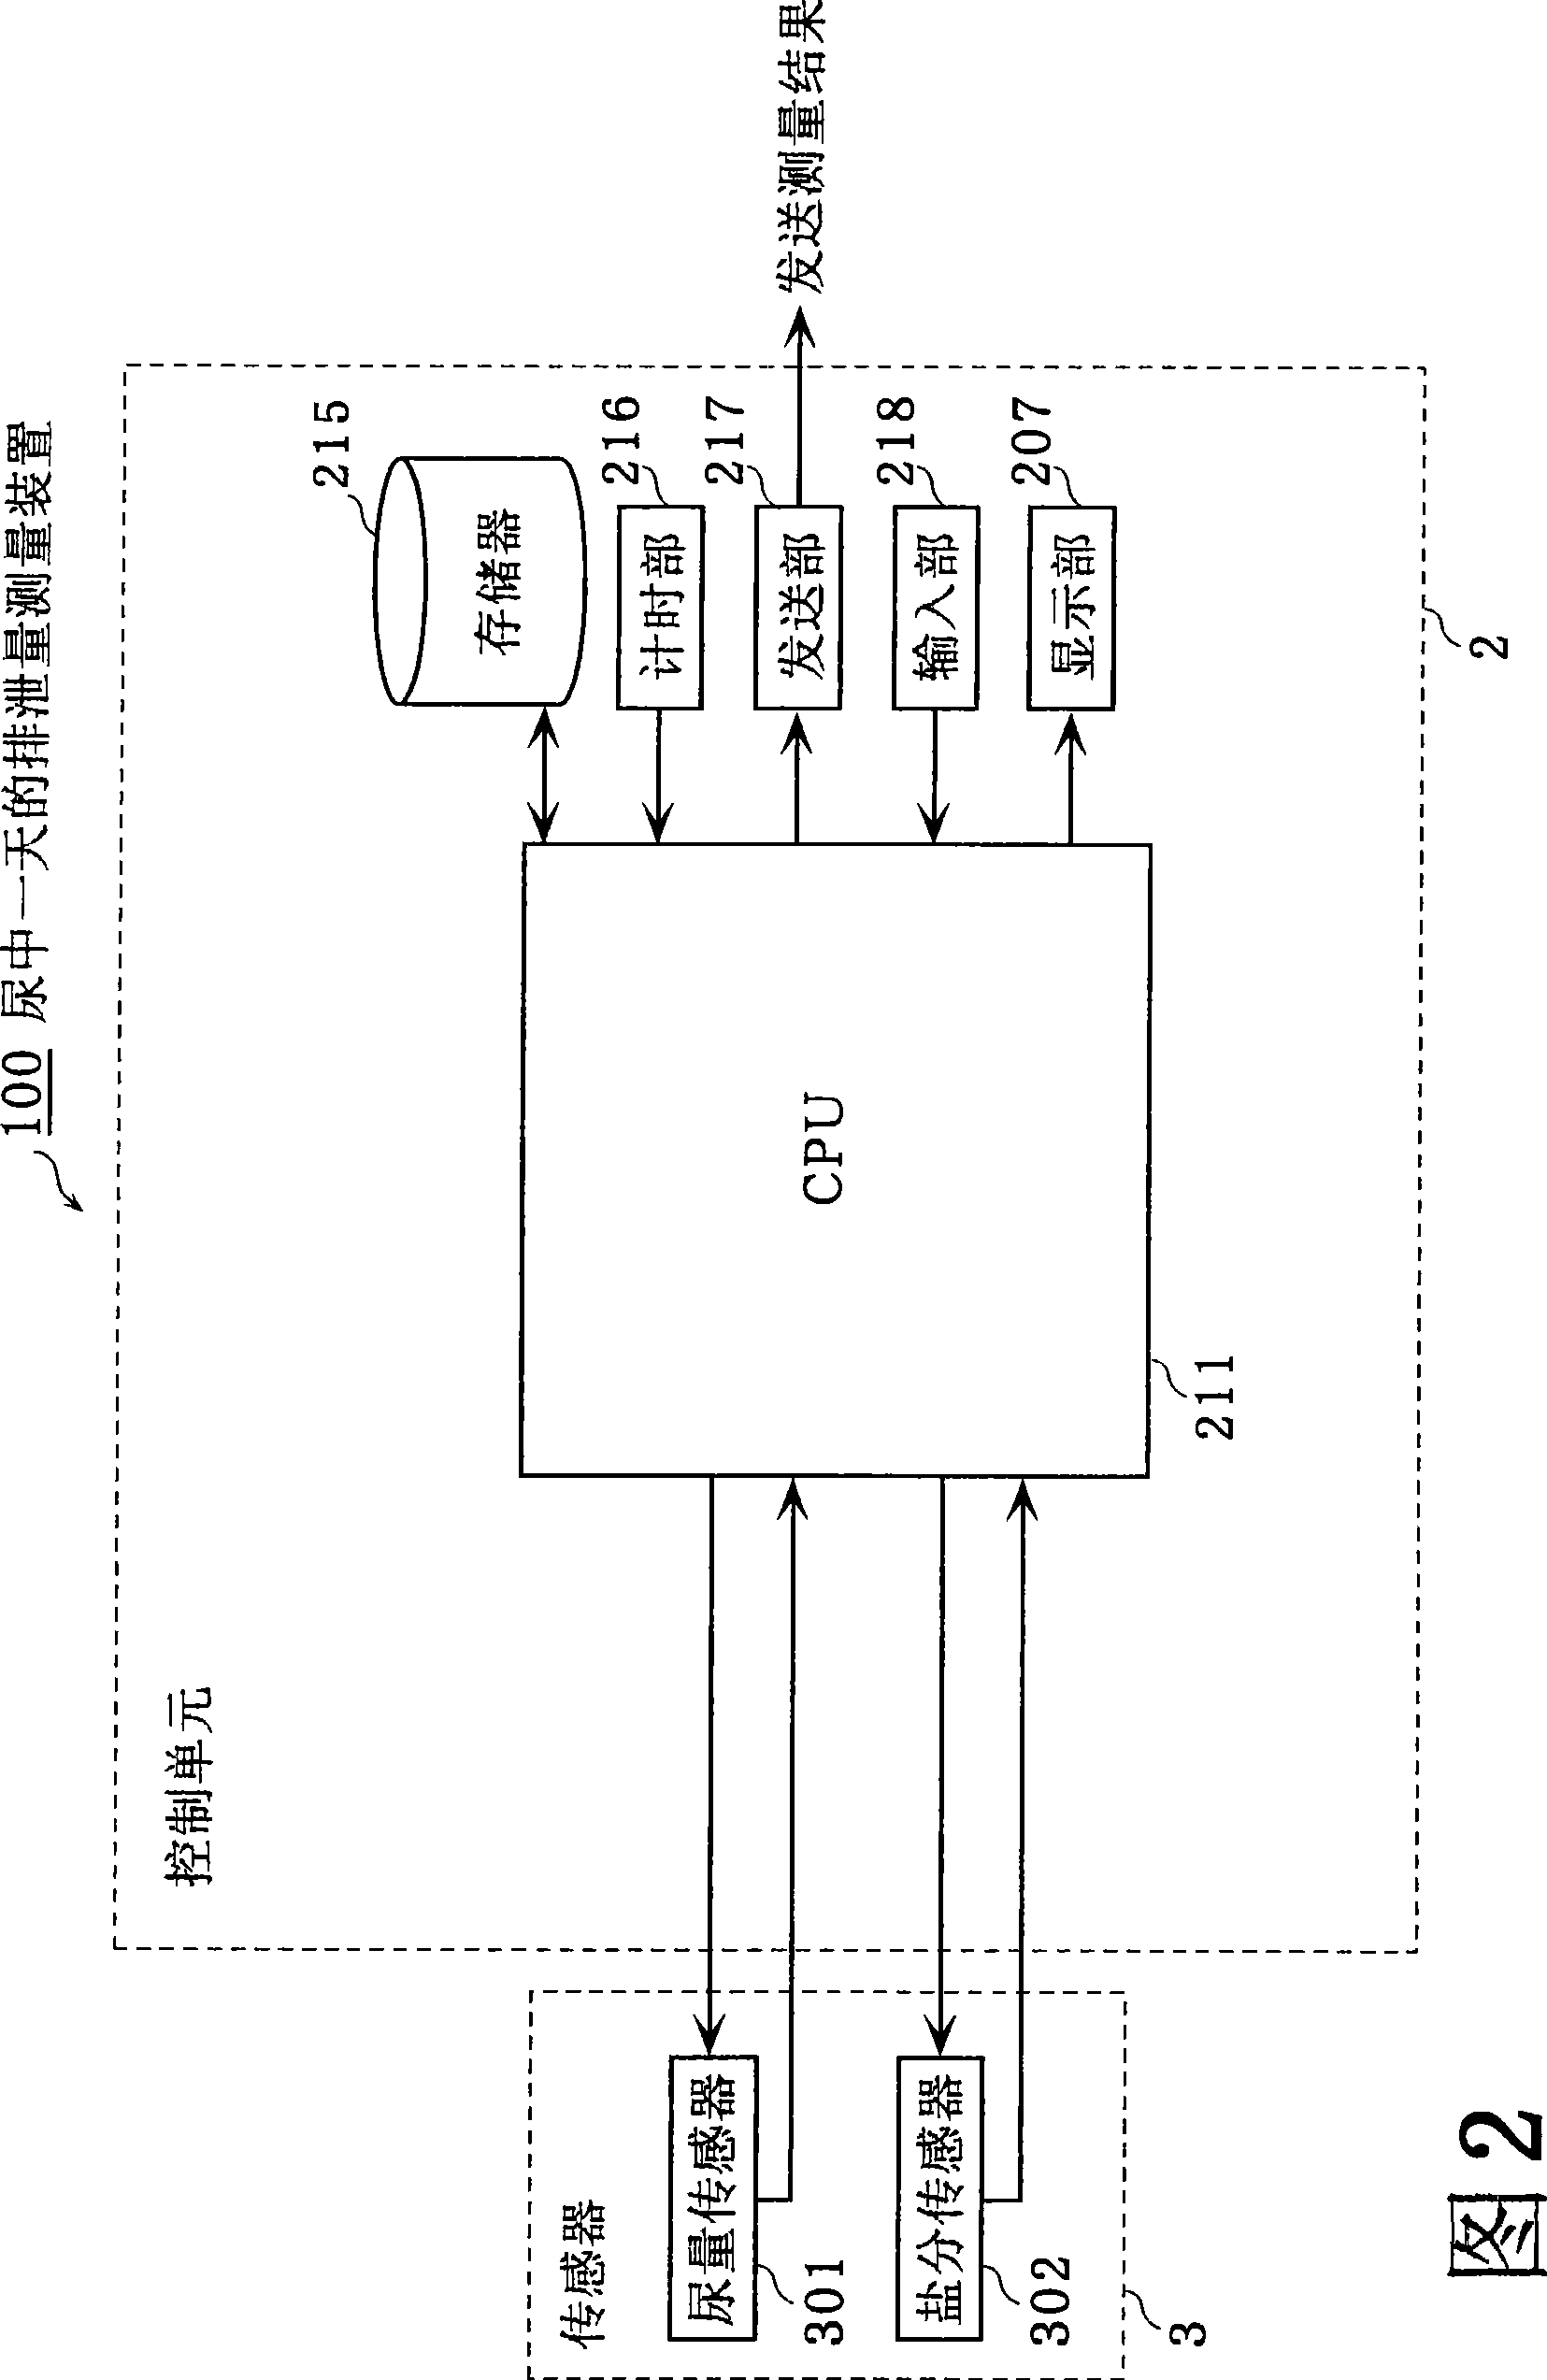 Method of measuring daily urinary excretion and apparatus for measuring daily urinary excretion